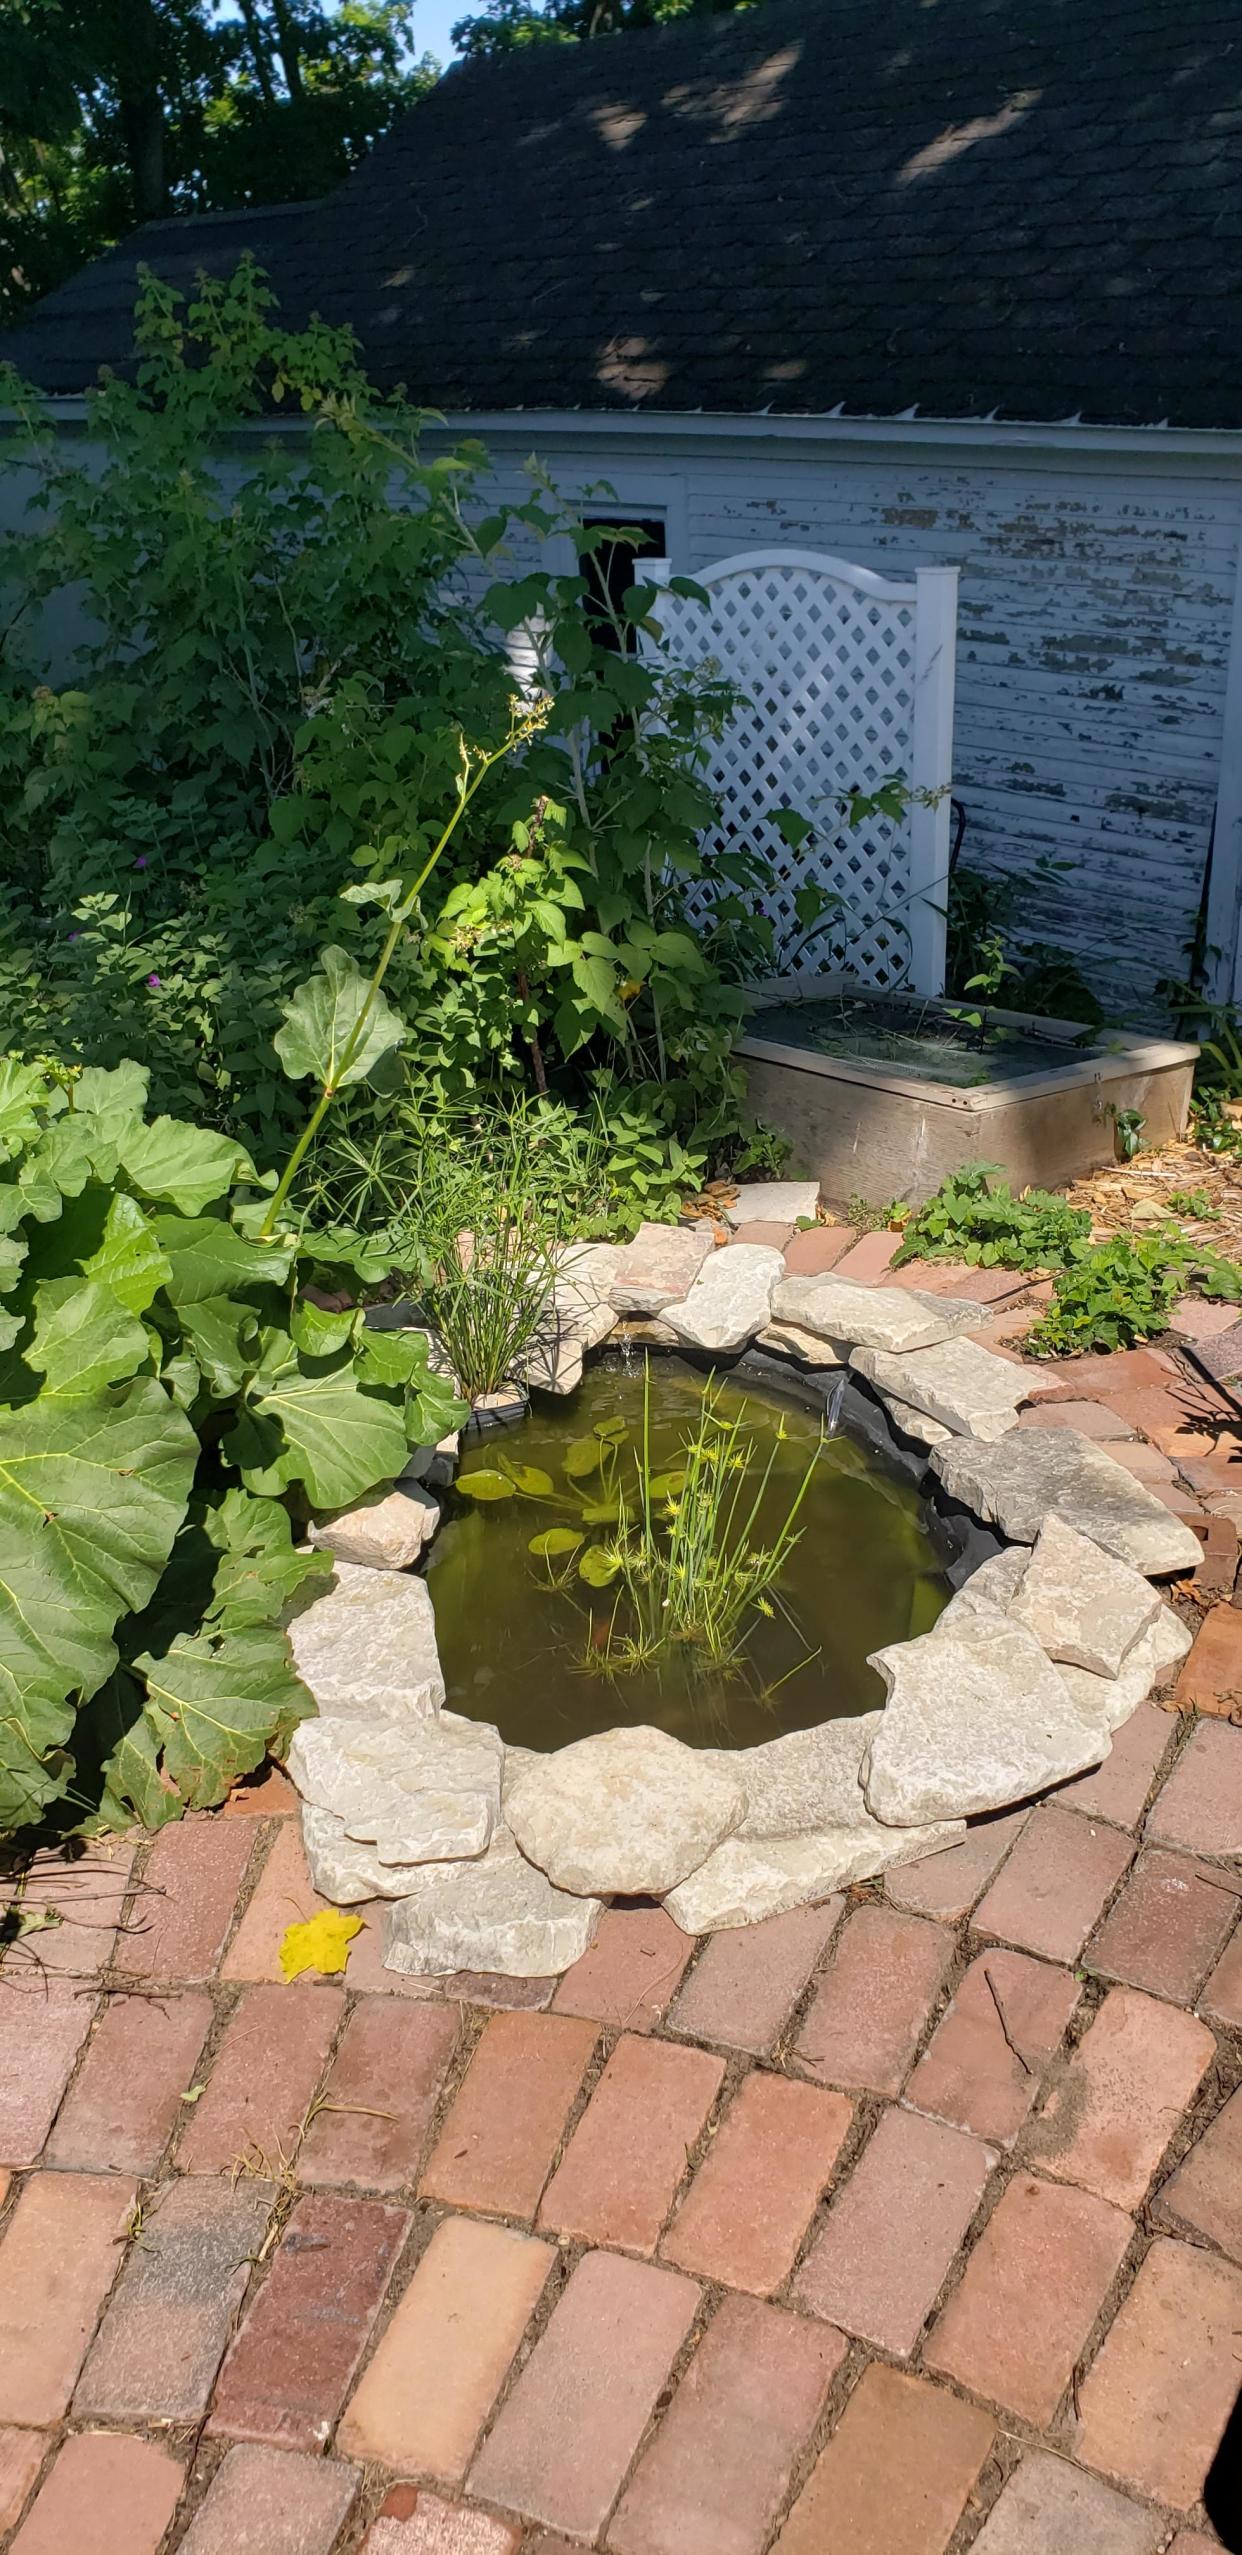 The Agria's pocket water garden in action.